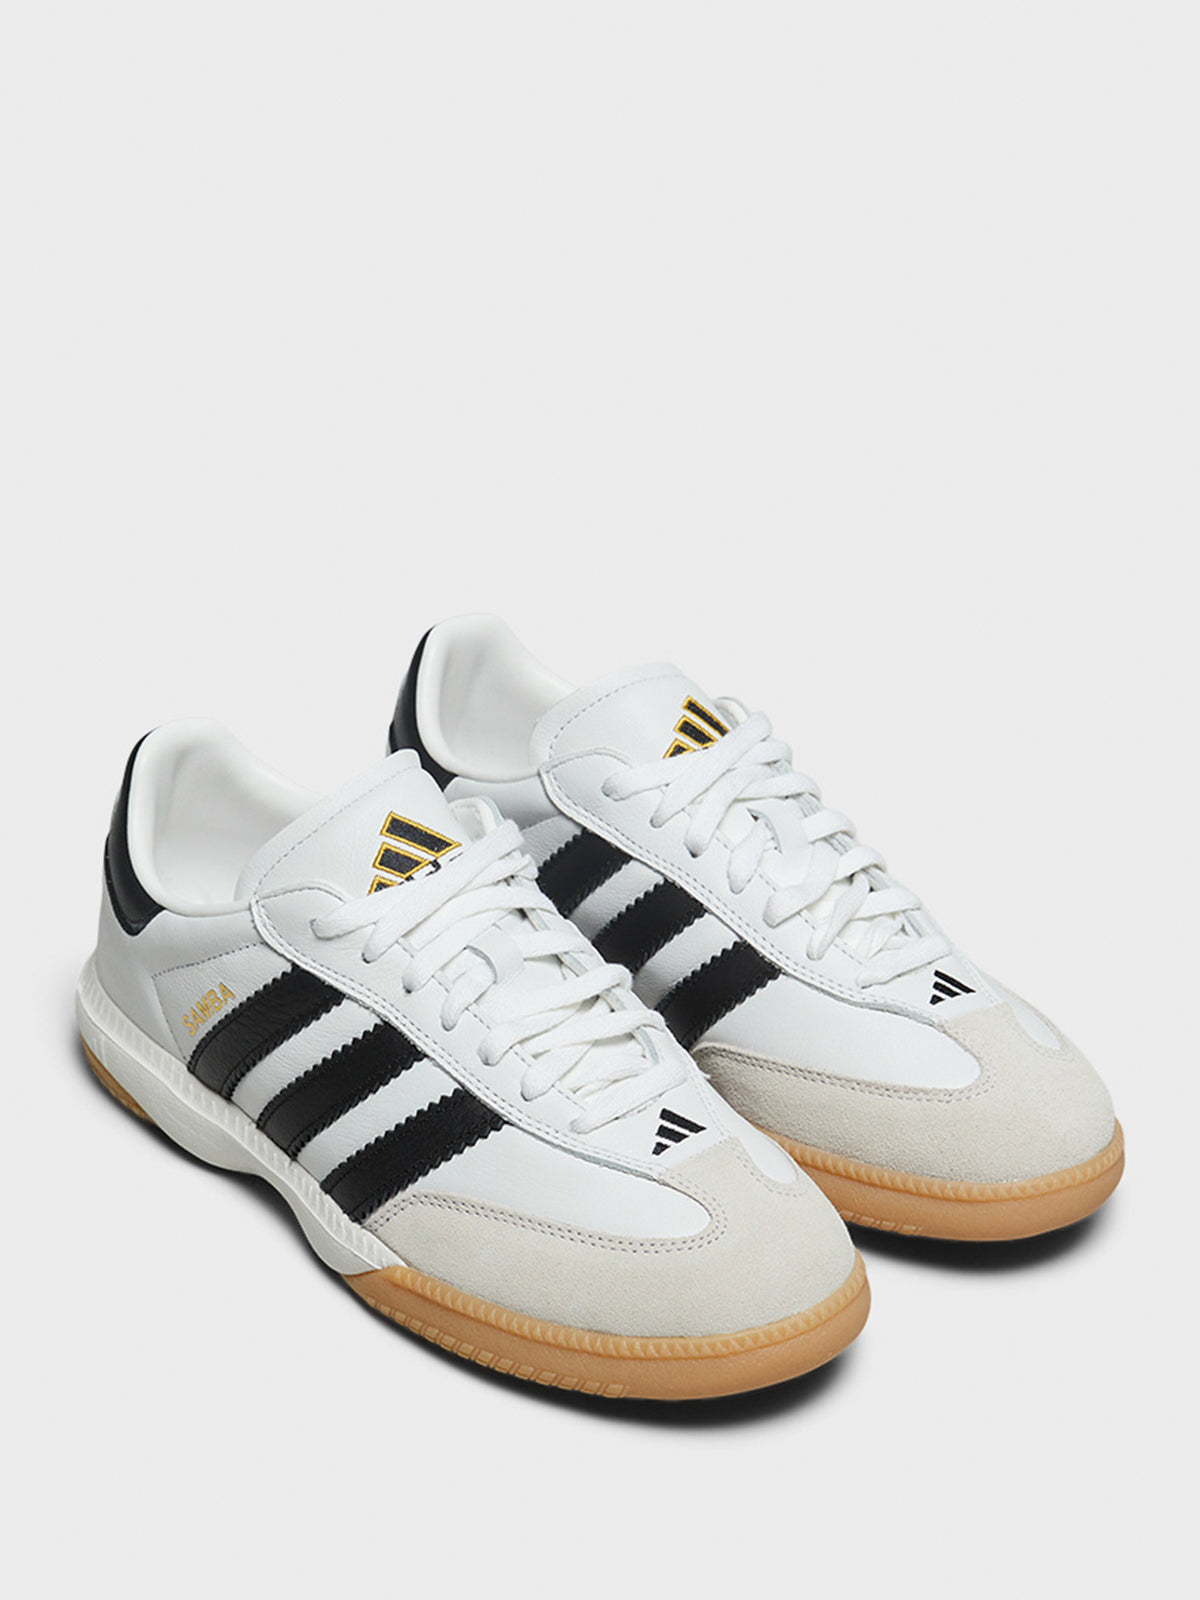 Samba MN Sneakers in White and Black